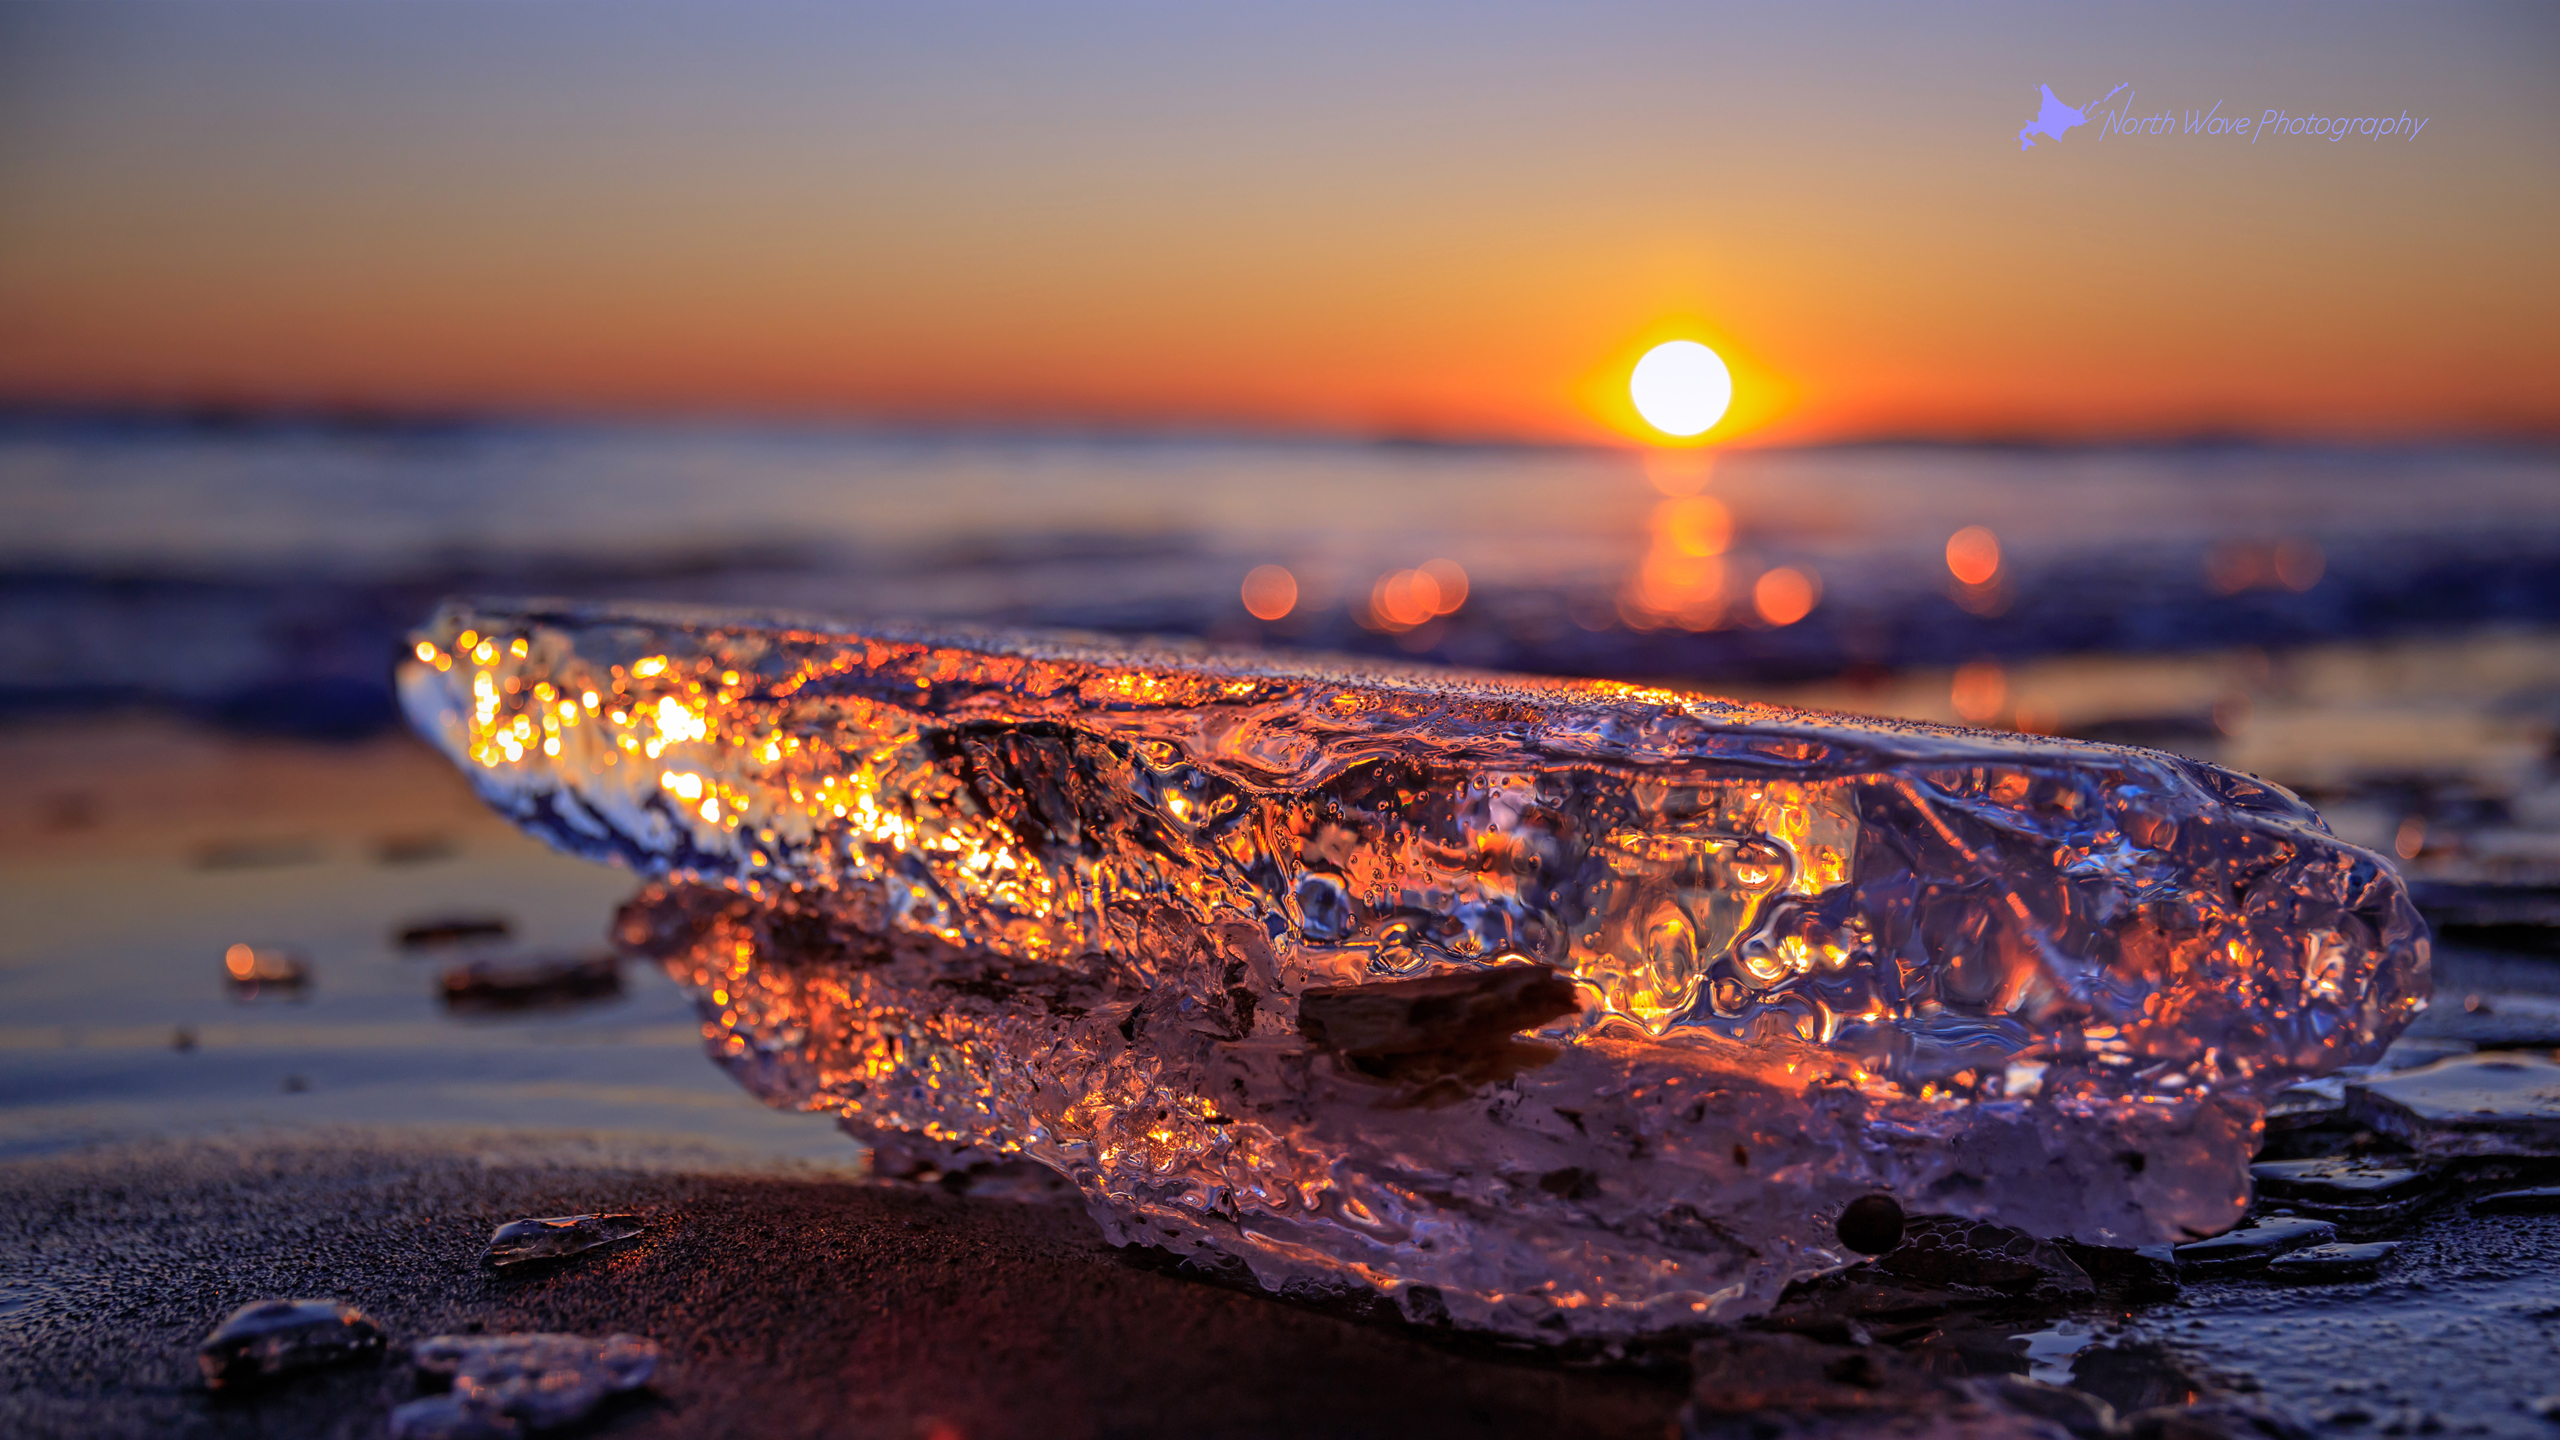 jewelry-ice-in-the-sunrise-for-imac